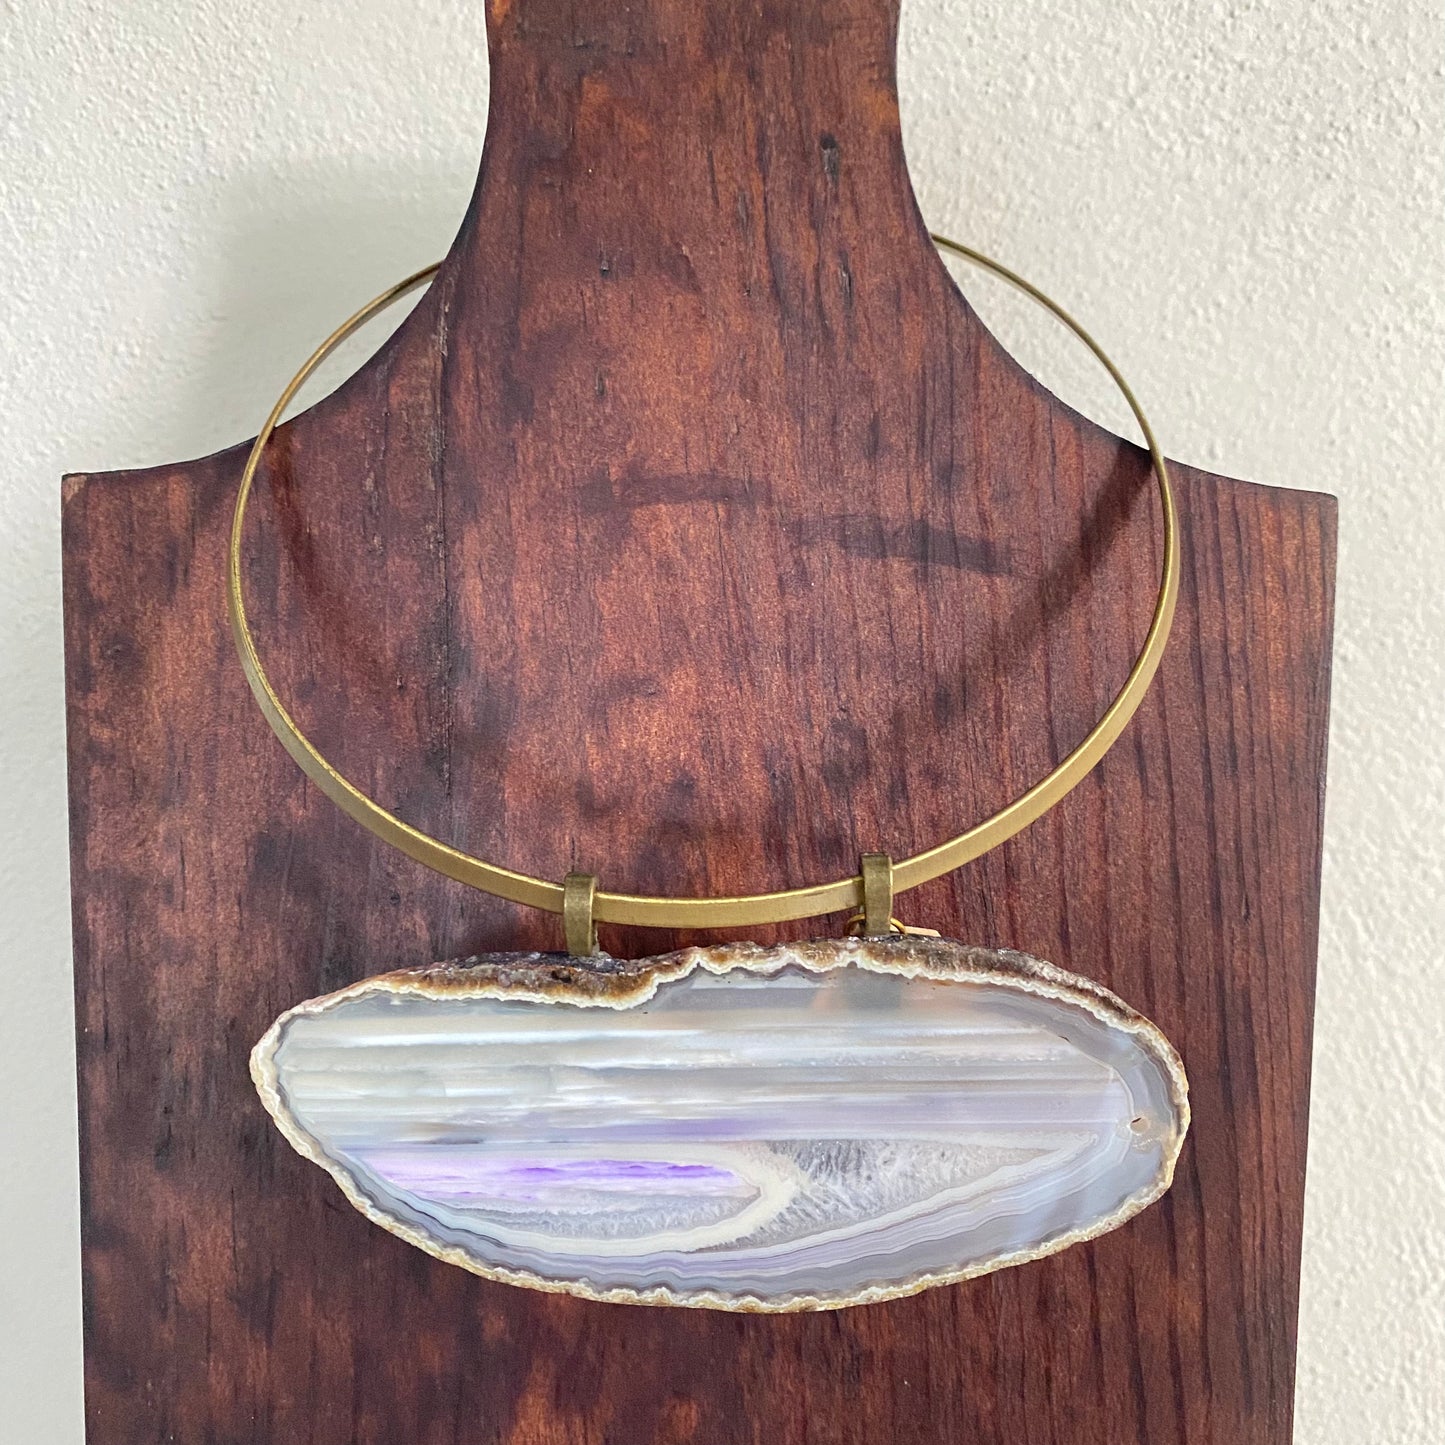 Agate Stone Necklace